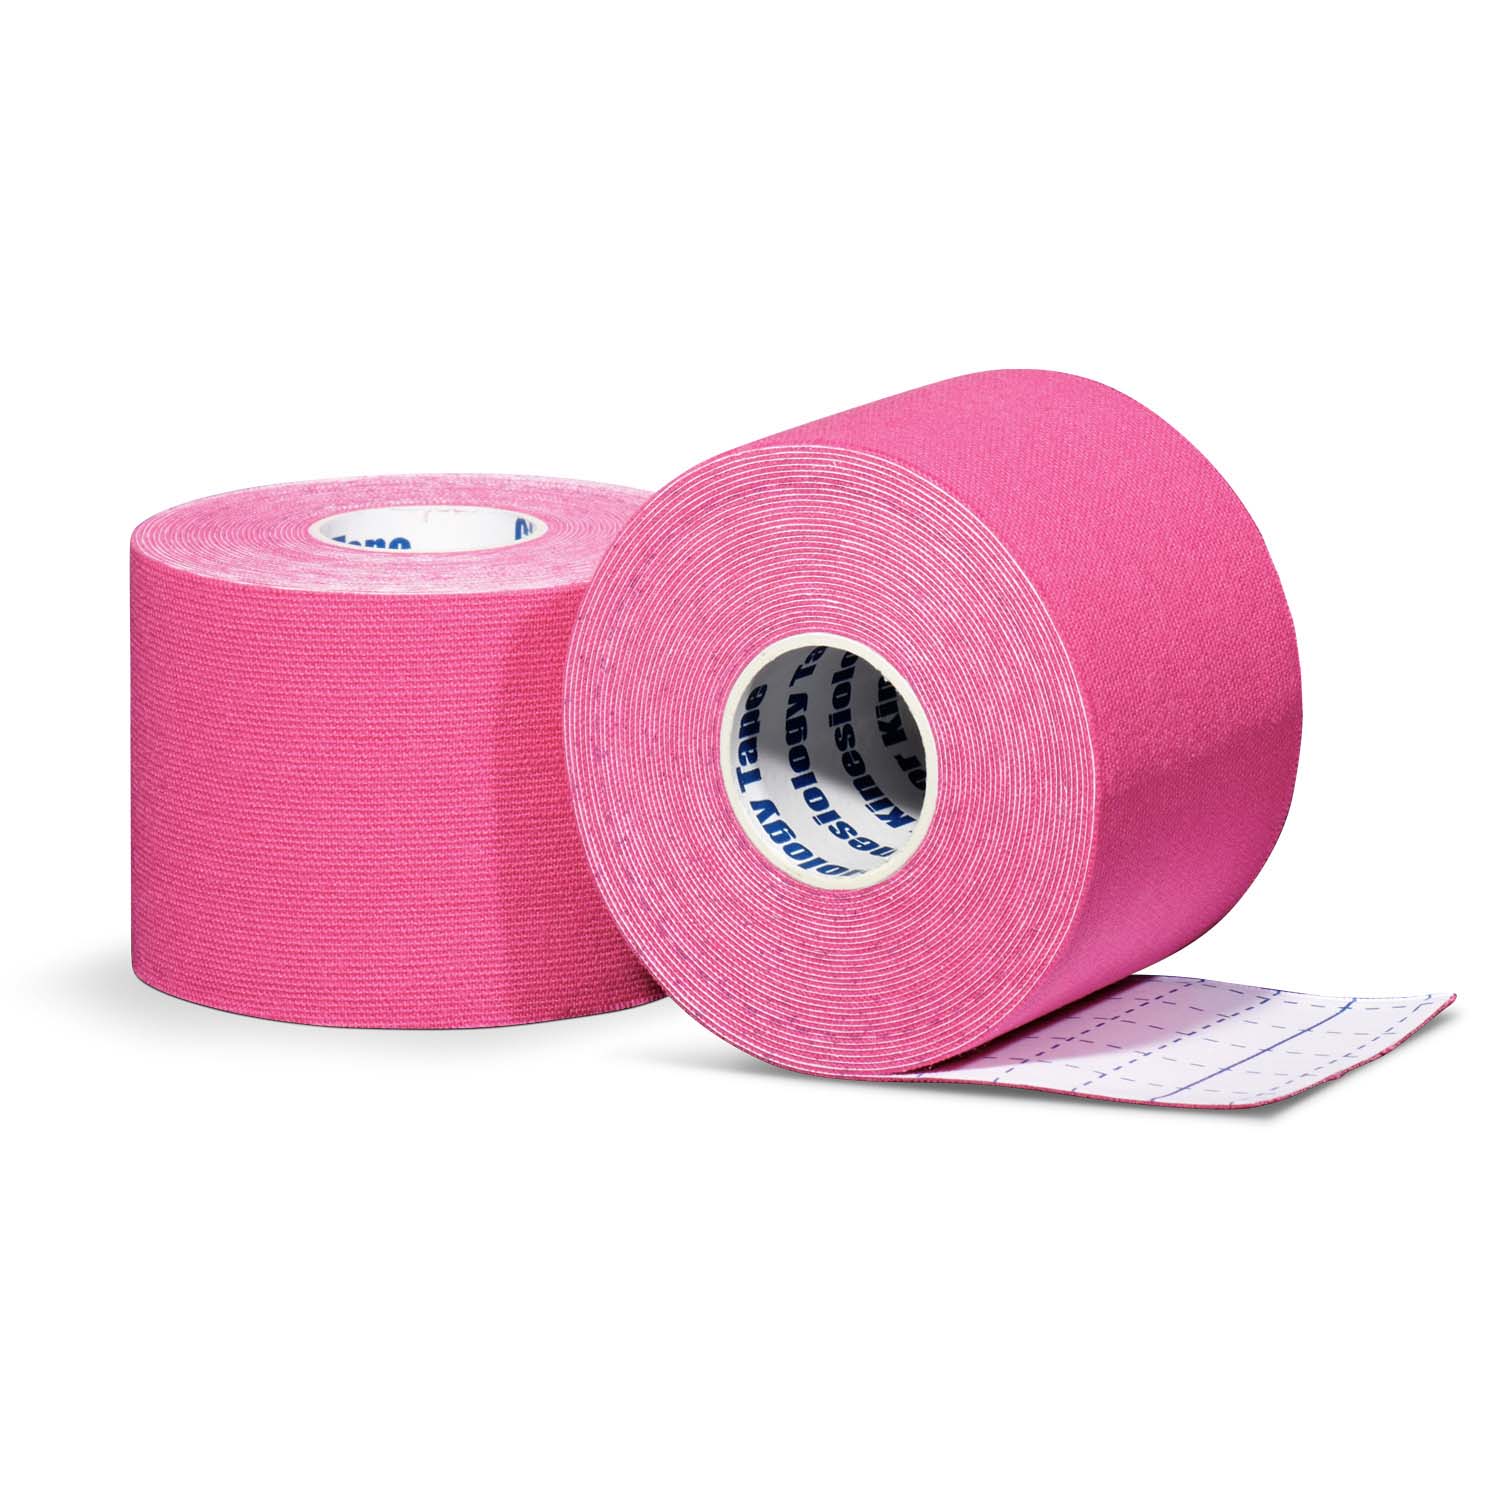 Kinesiology tape per roll pink front and back view